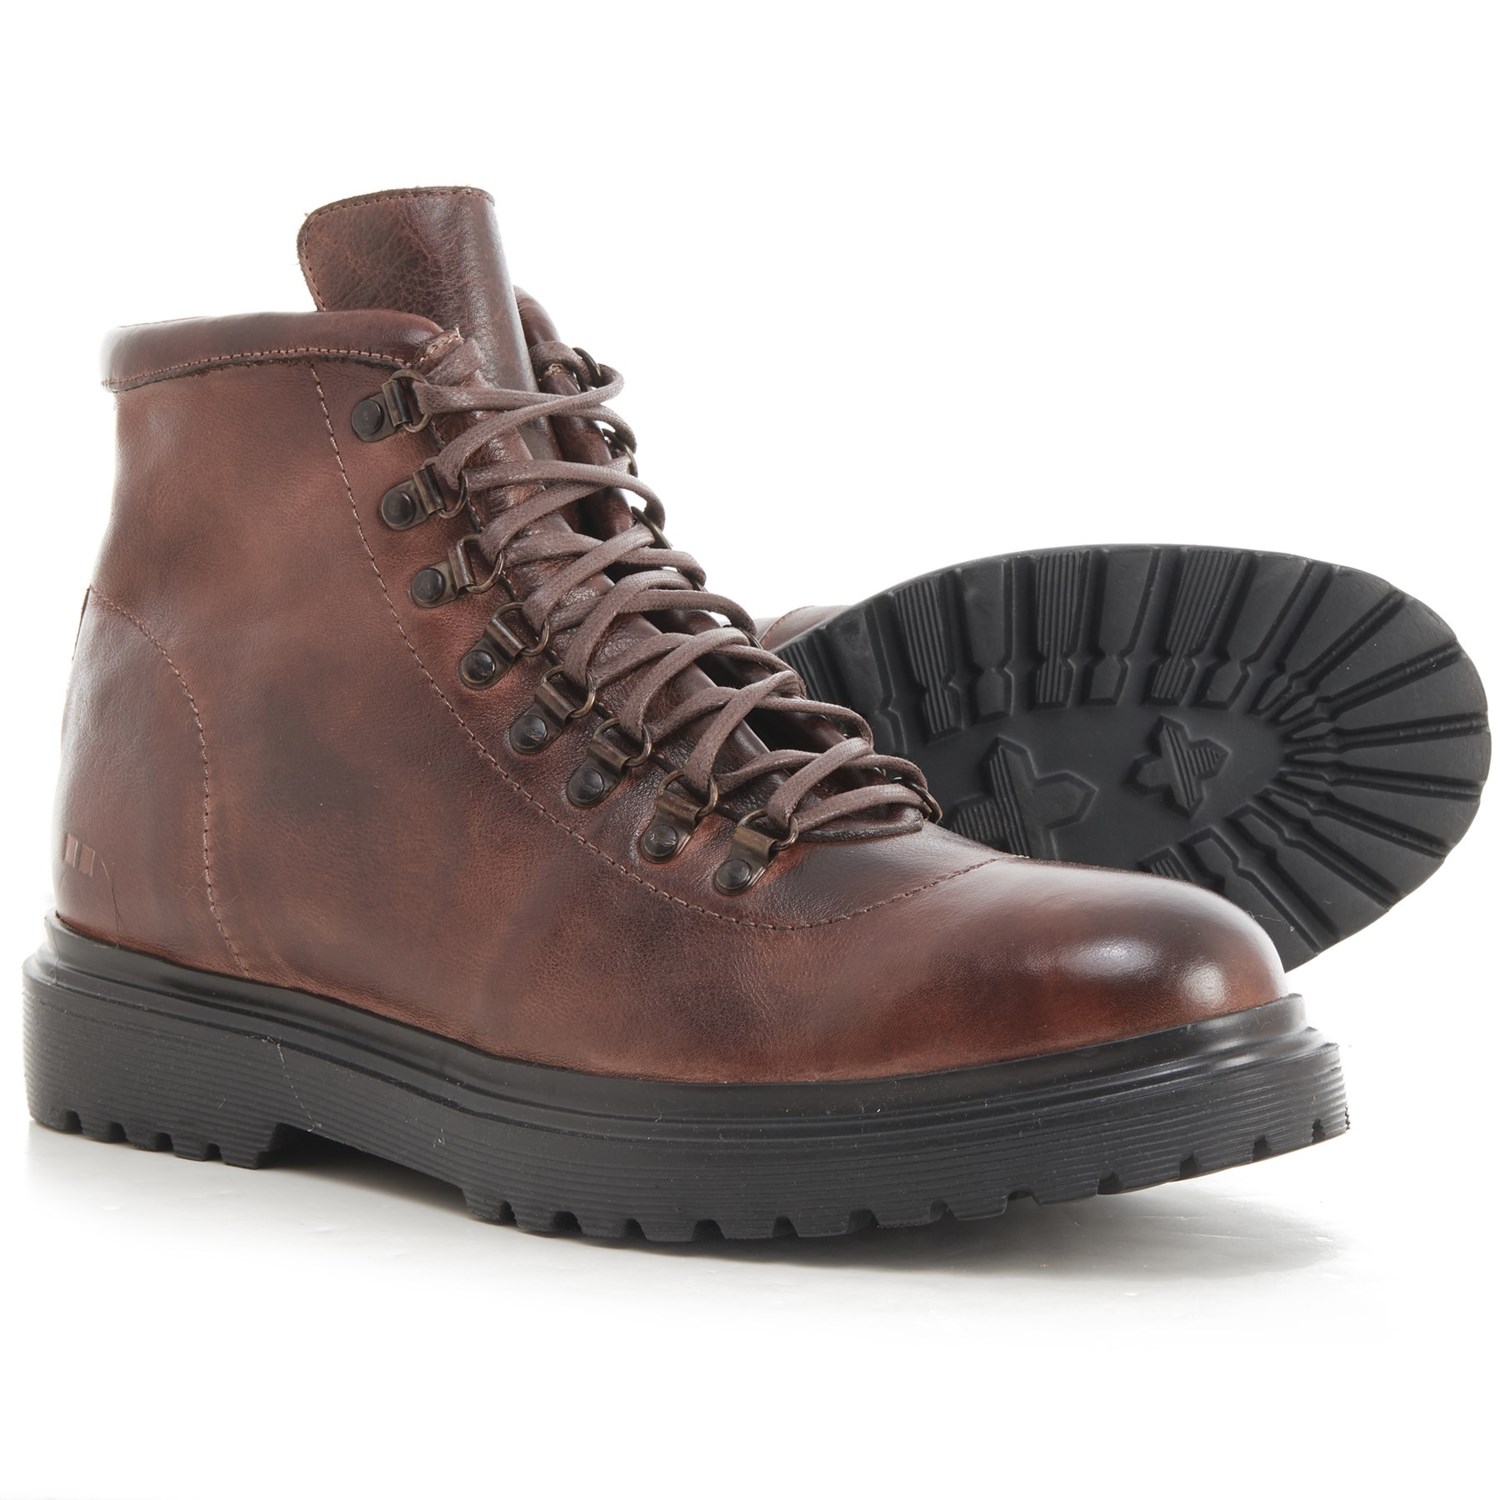 Bed Stu Arrowhead Boots (For Men) - Save 60%